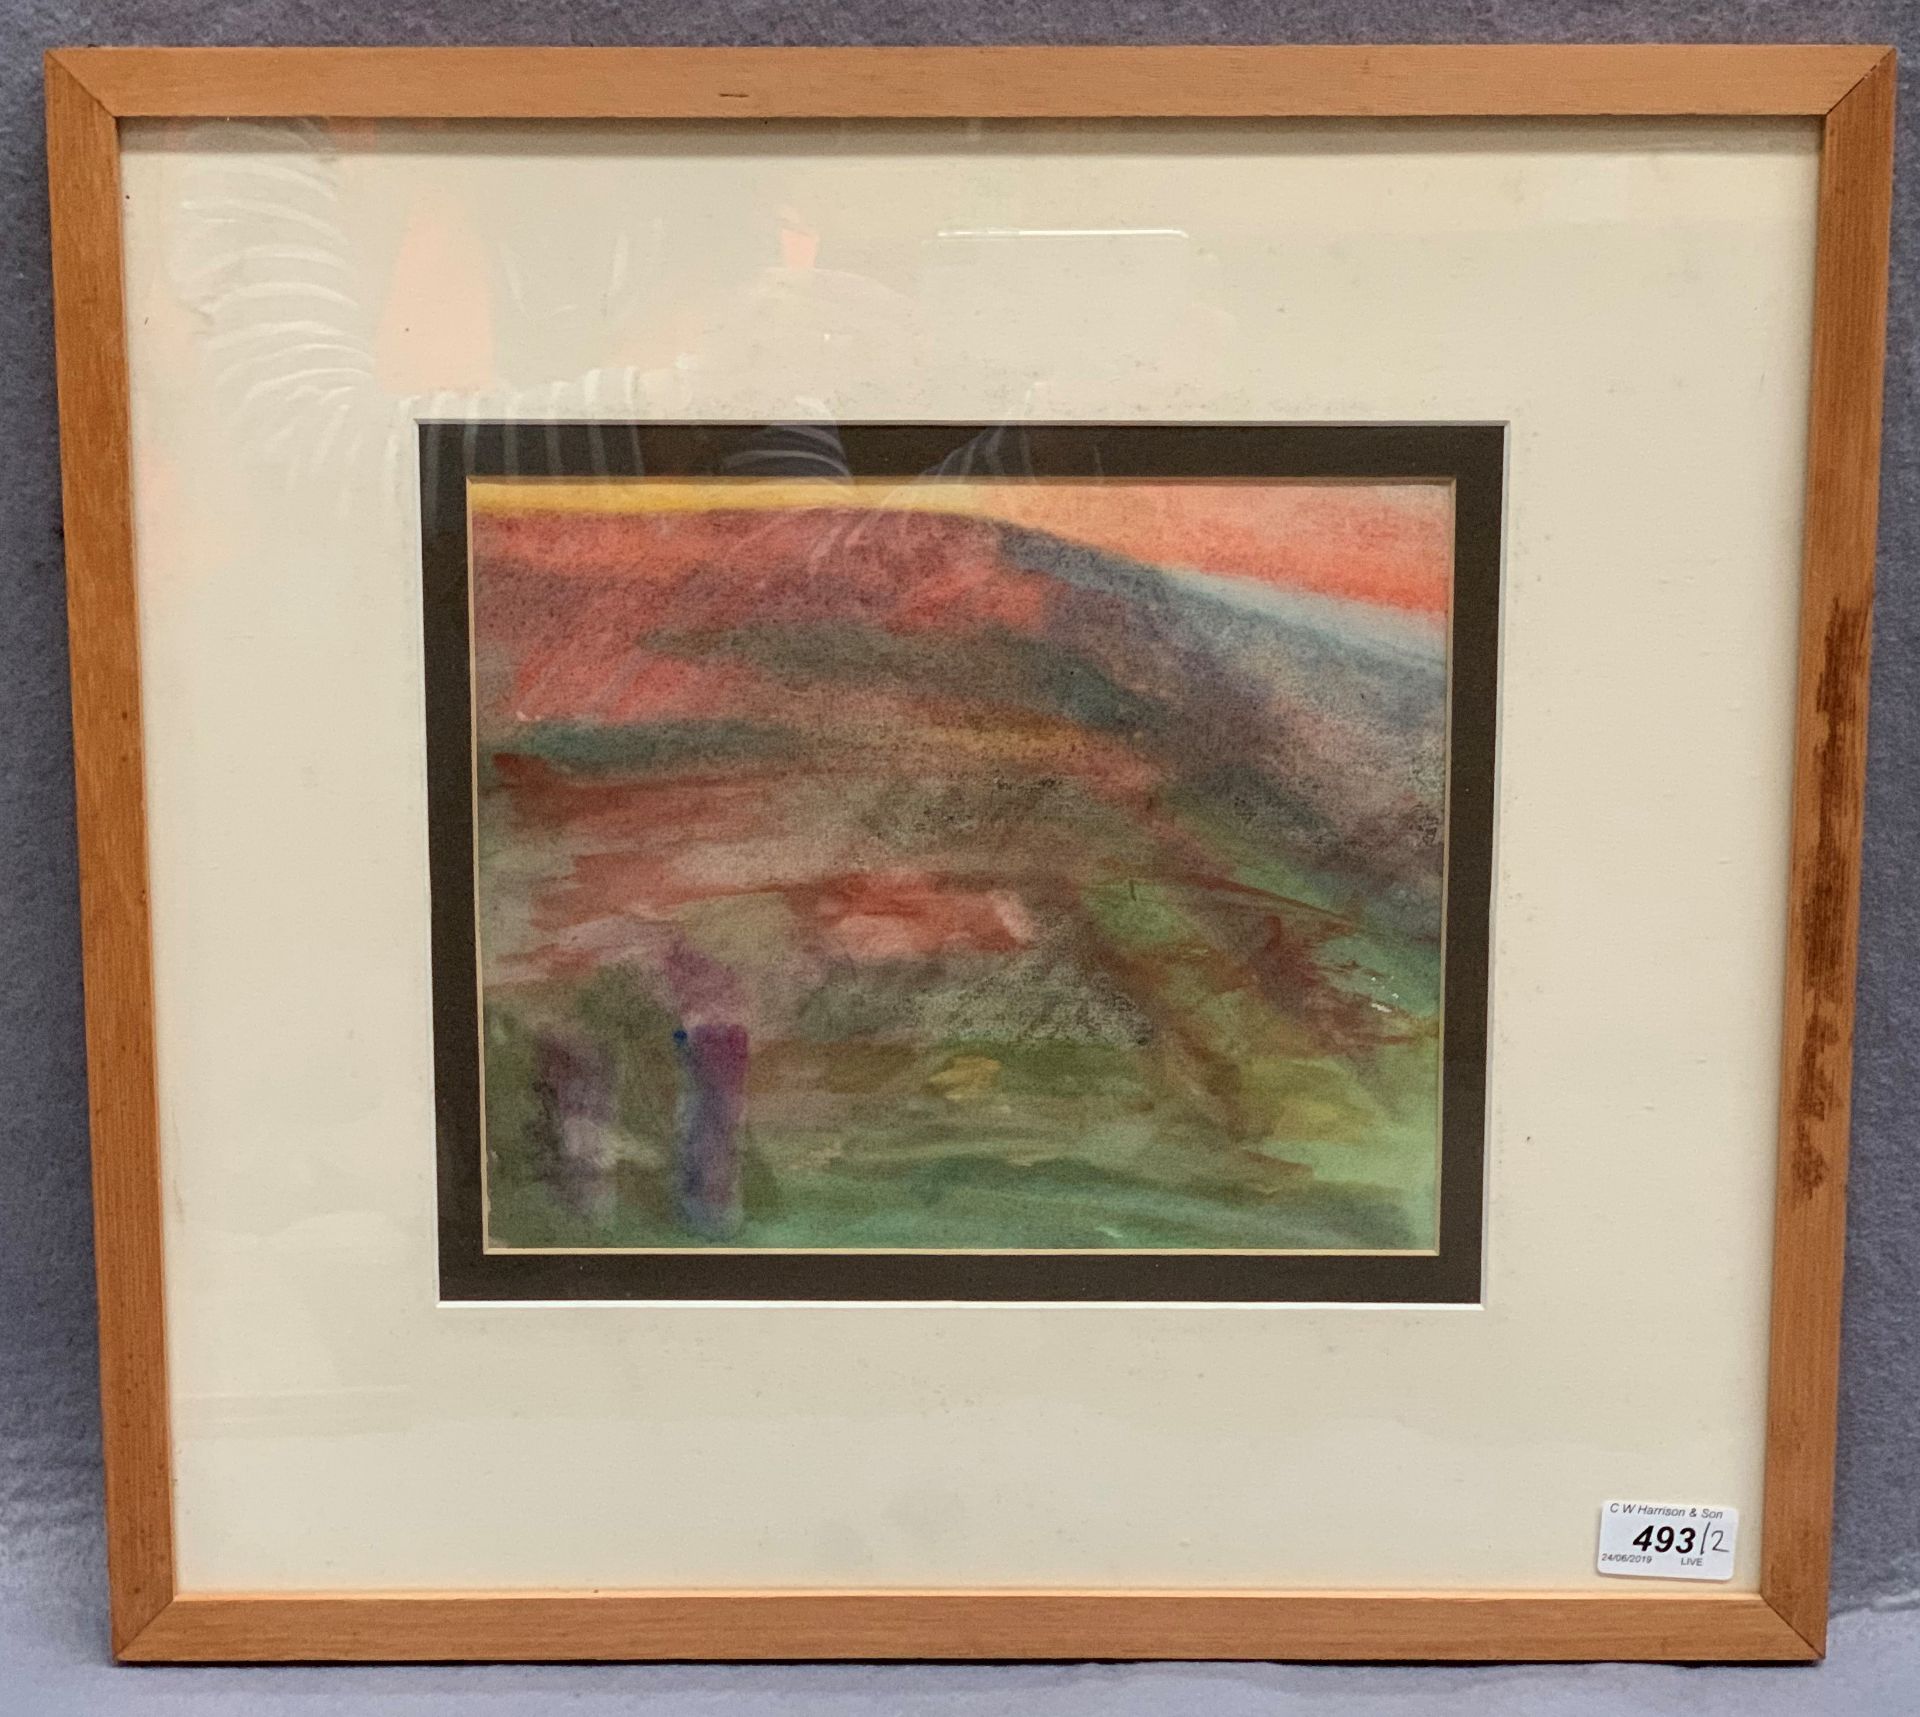 Peter Smailes two framed watercolours 'At Brimham Rocks towards York' 25 x 34cm signed in pencil